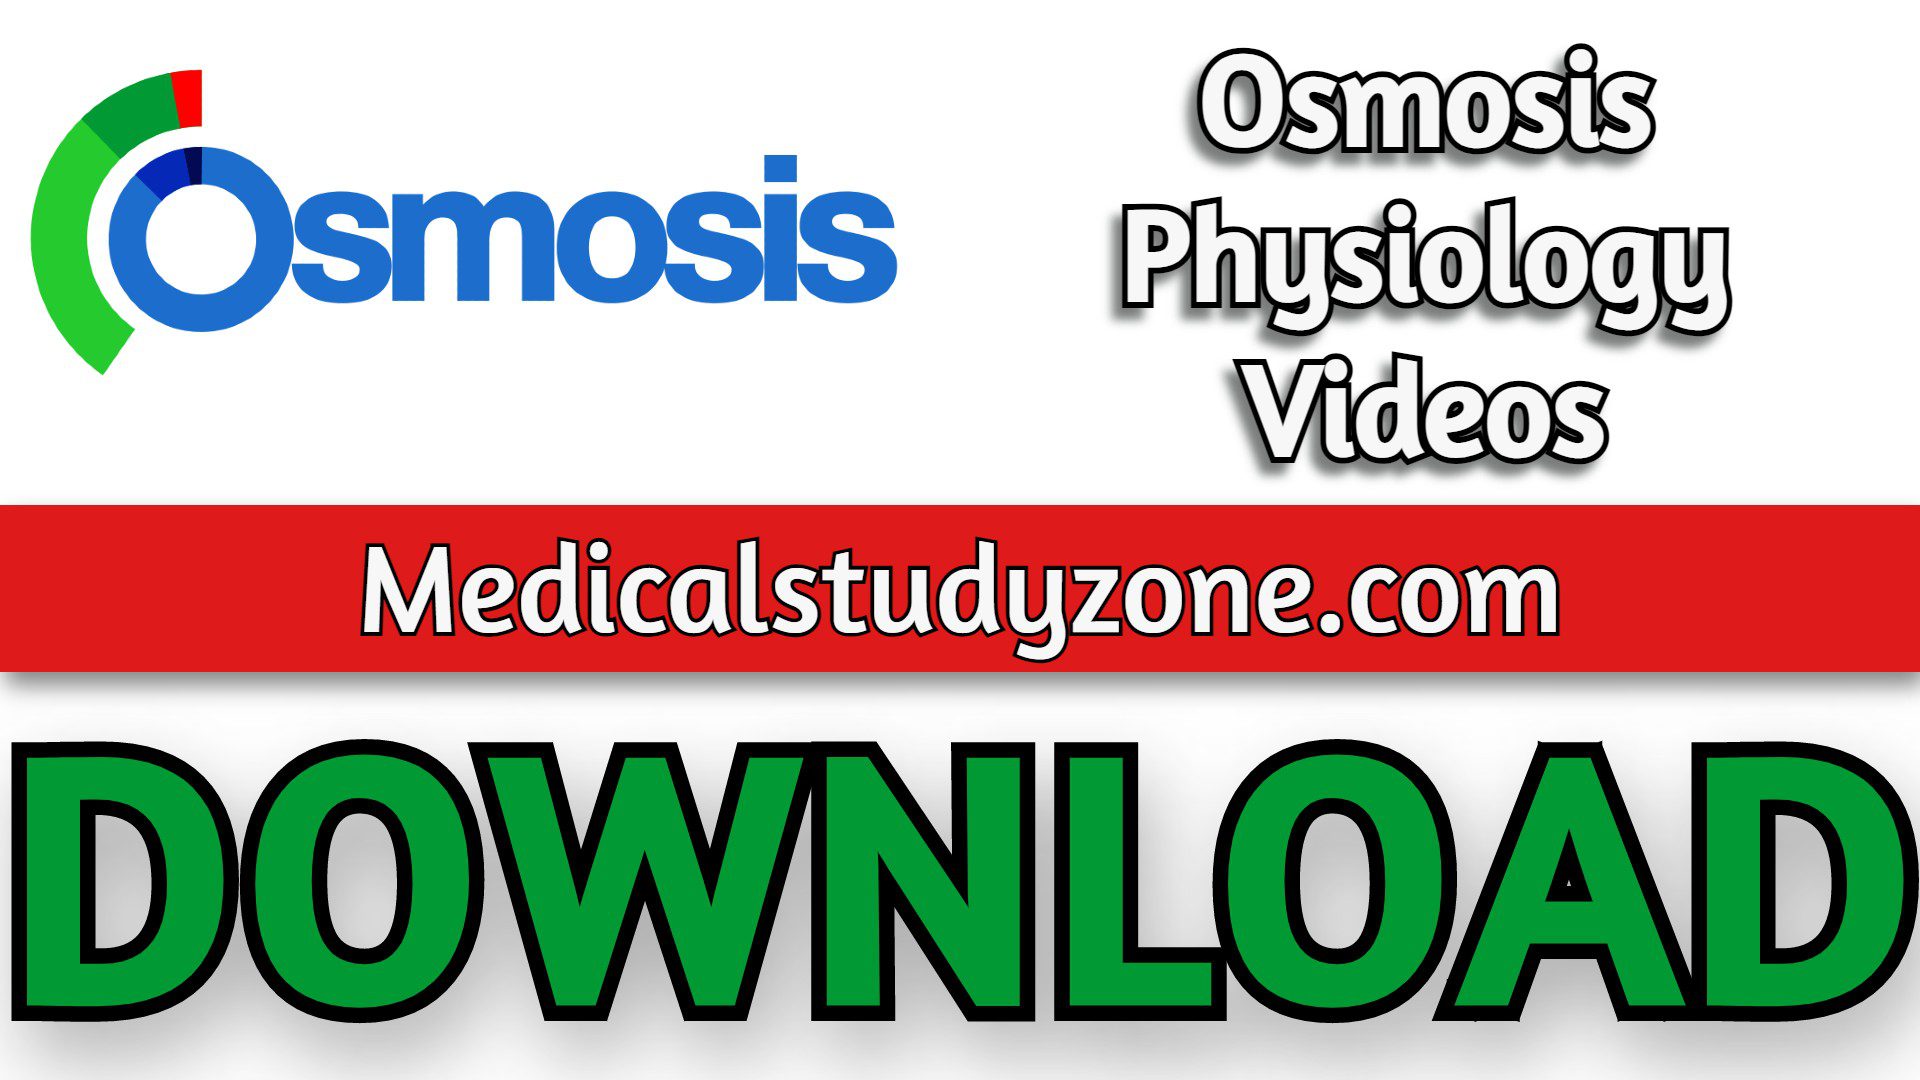 Osmosis Physiology Videos 2022 Free Download